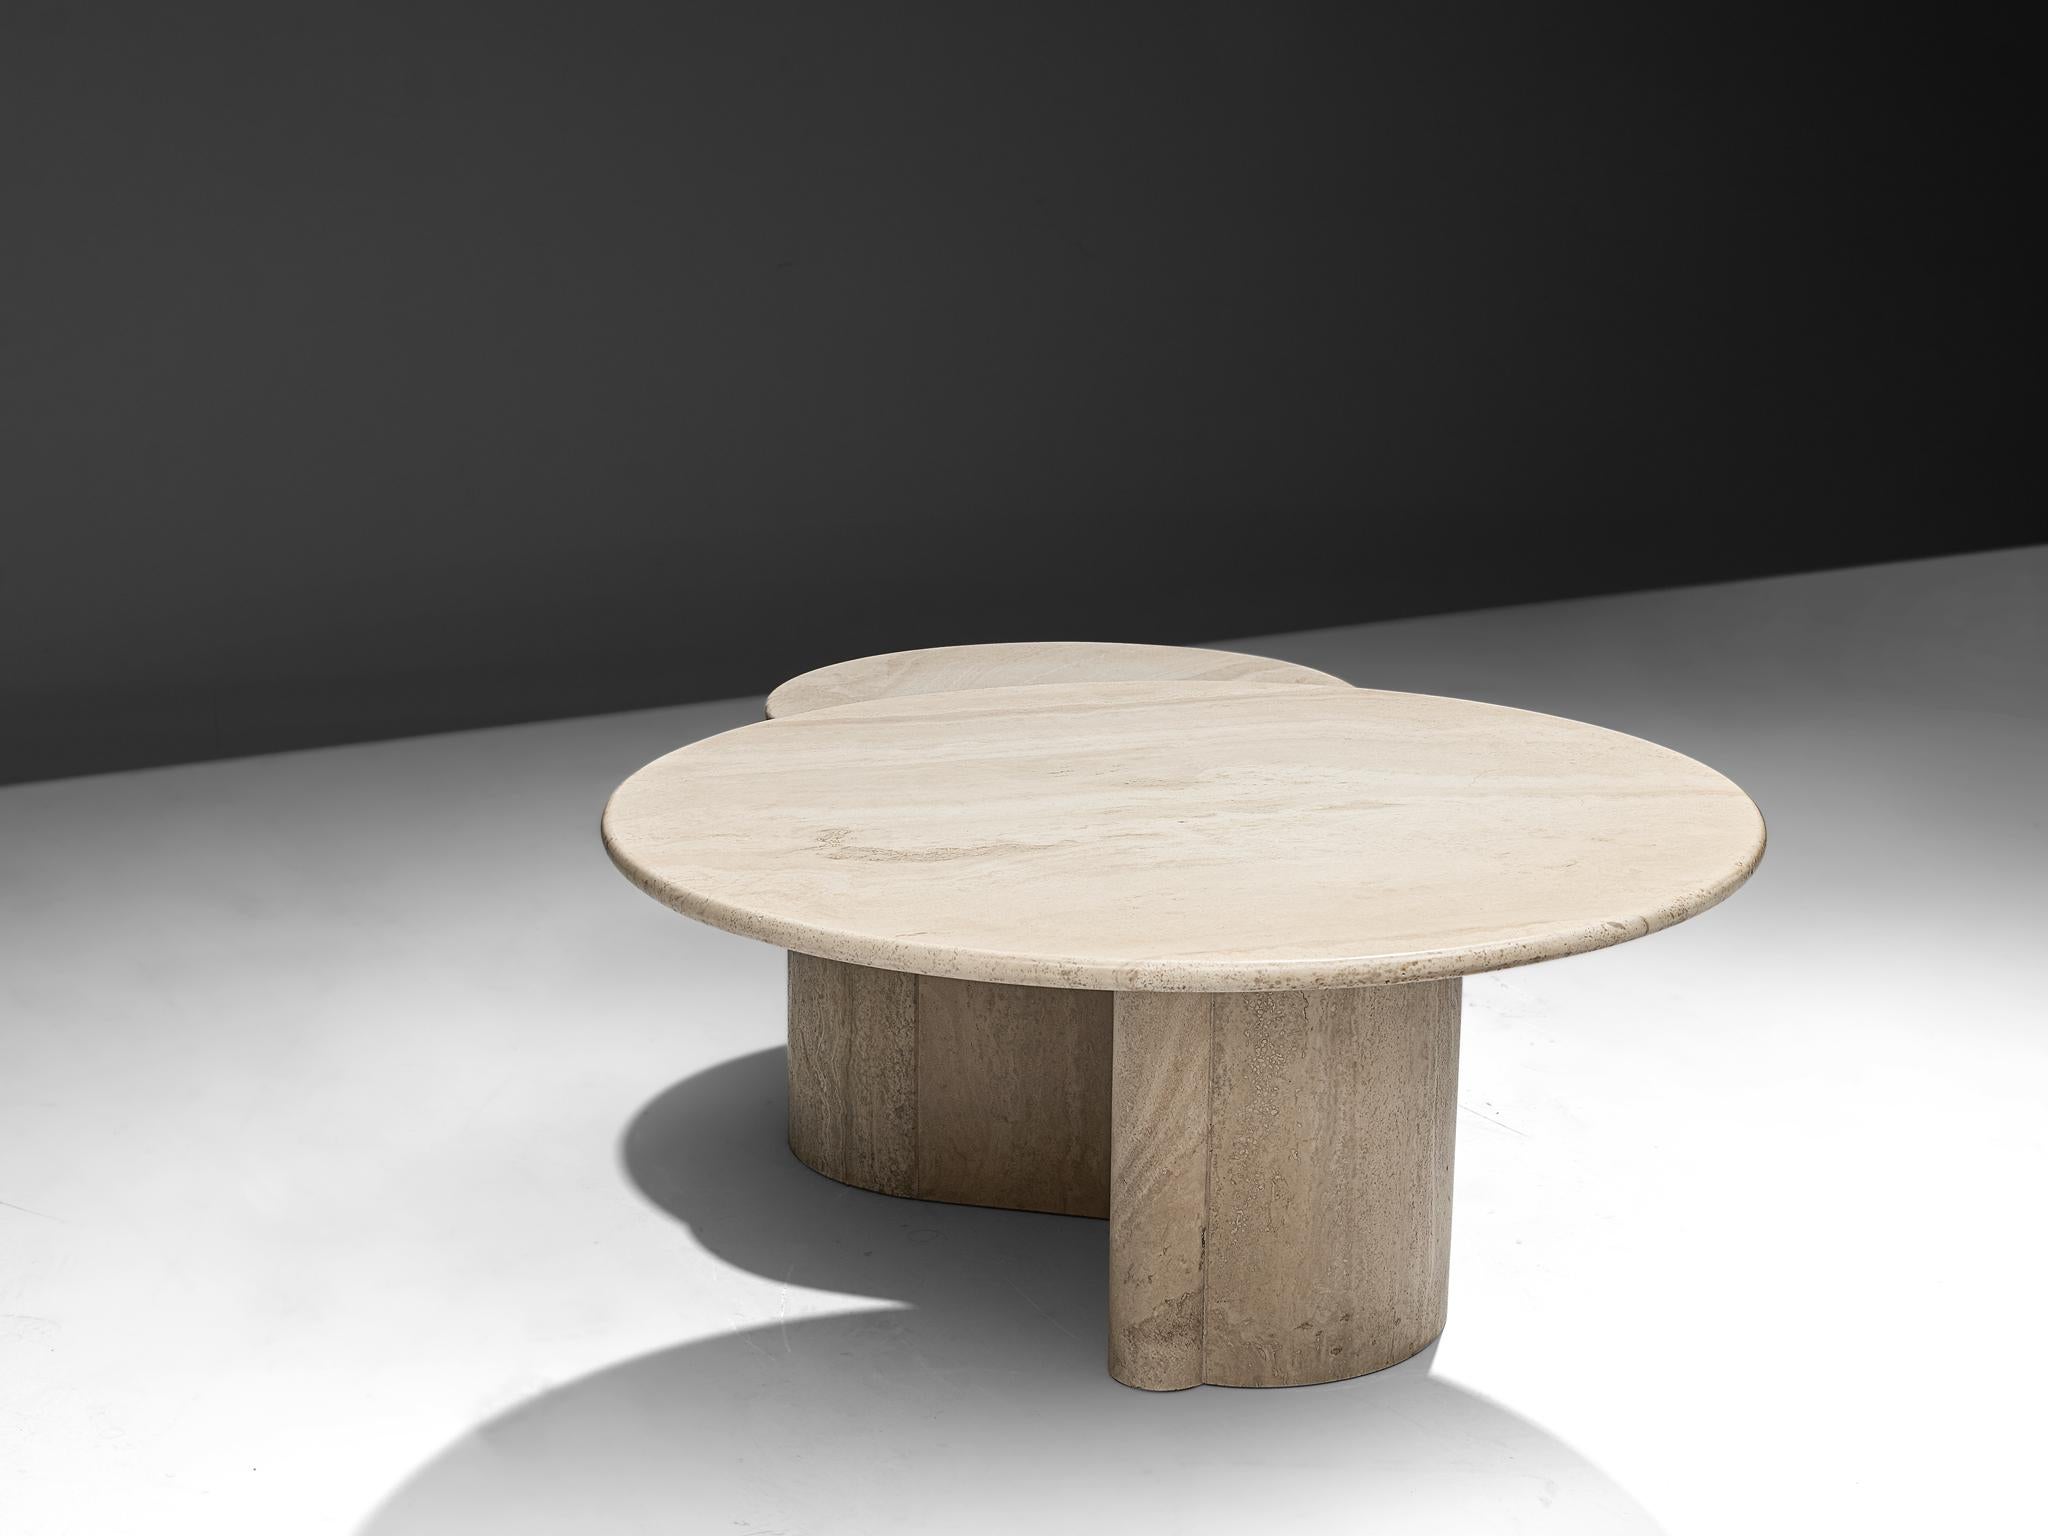 Late 20th Century Sculptural Travertine Coffee Table